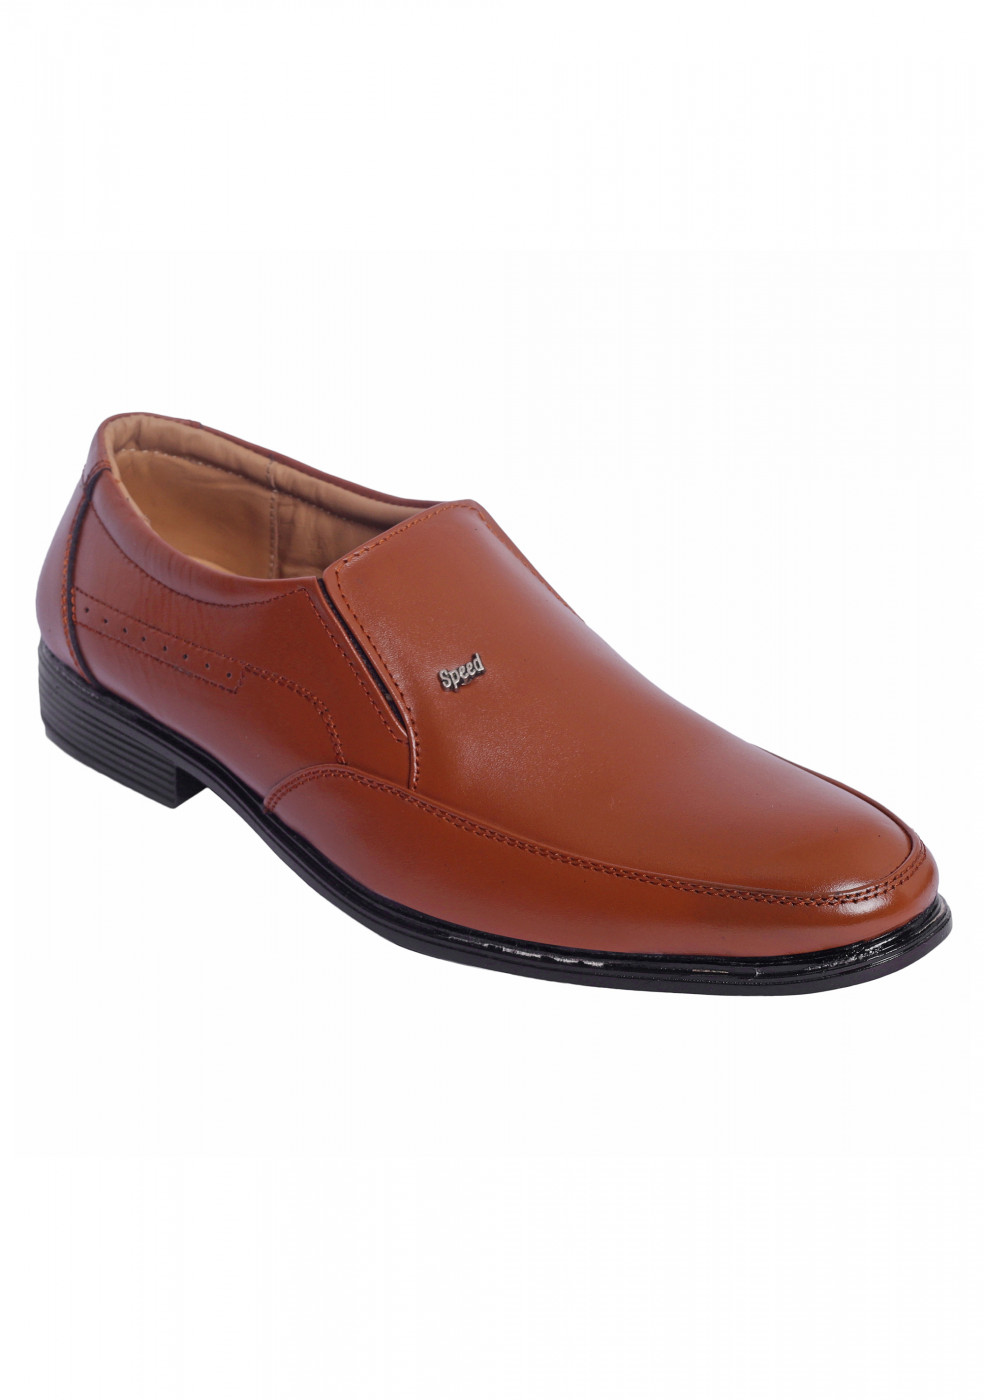 XSTOM Leather Formal Stylish TAN Color Shoes For Men